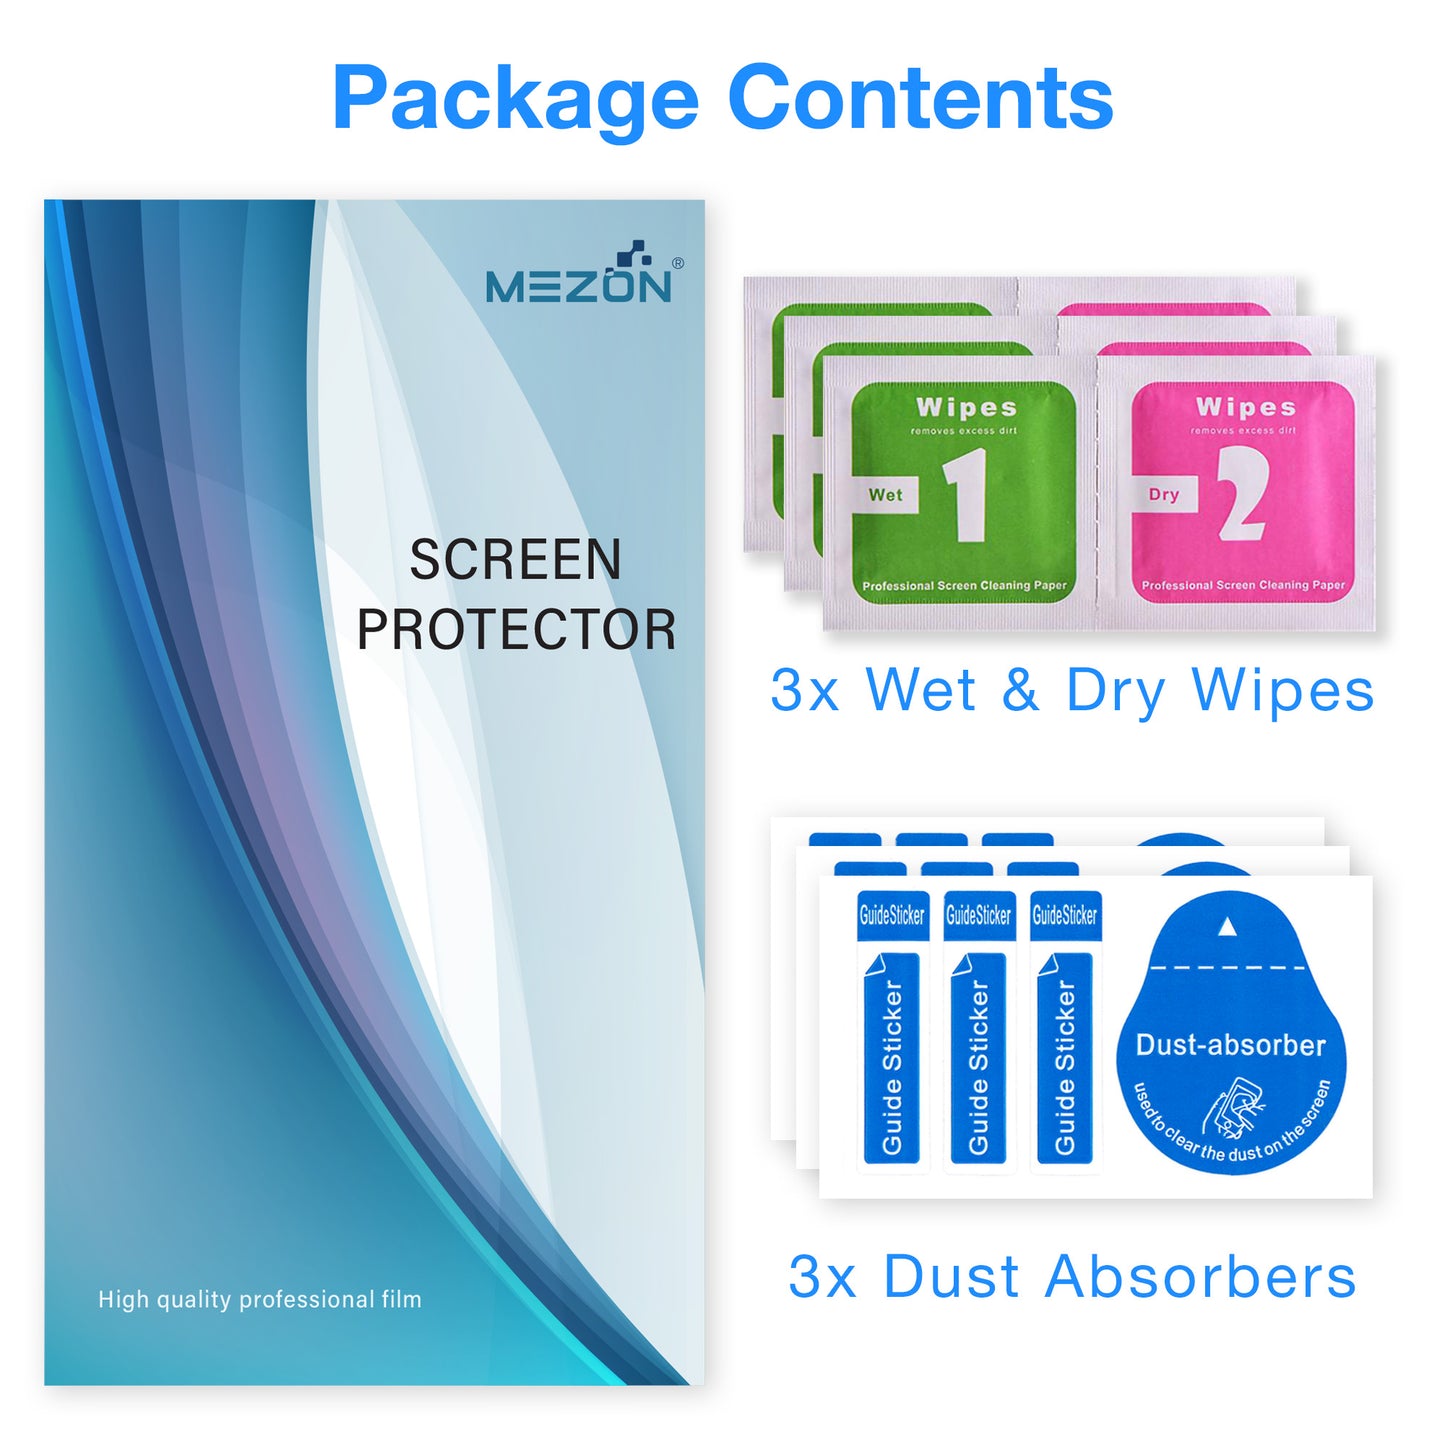 [3 Pack] MEZON Samsung Galaxy A42 5G Ultra Clear Screen Protector Case Friendly Film (A42 5G, Clear)